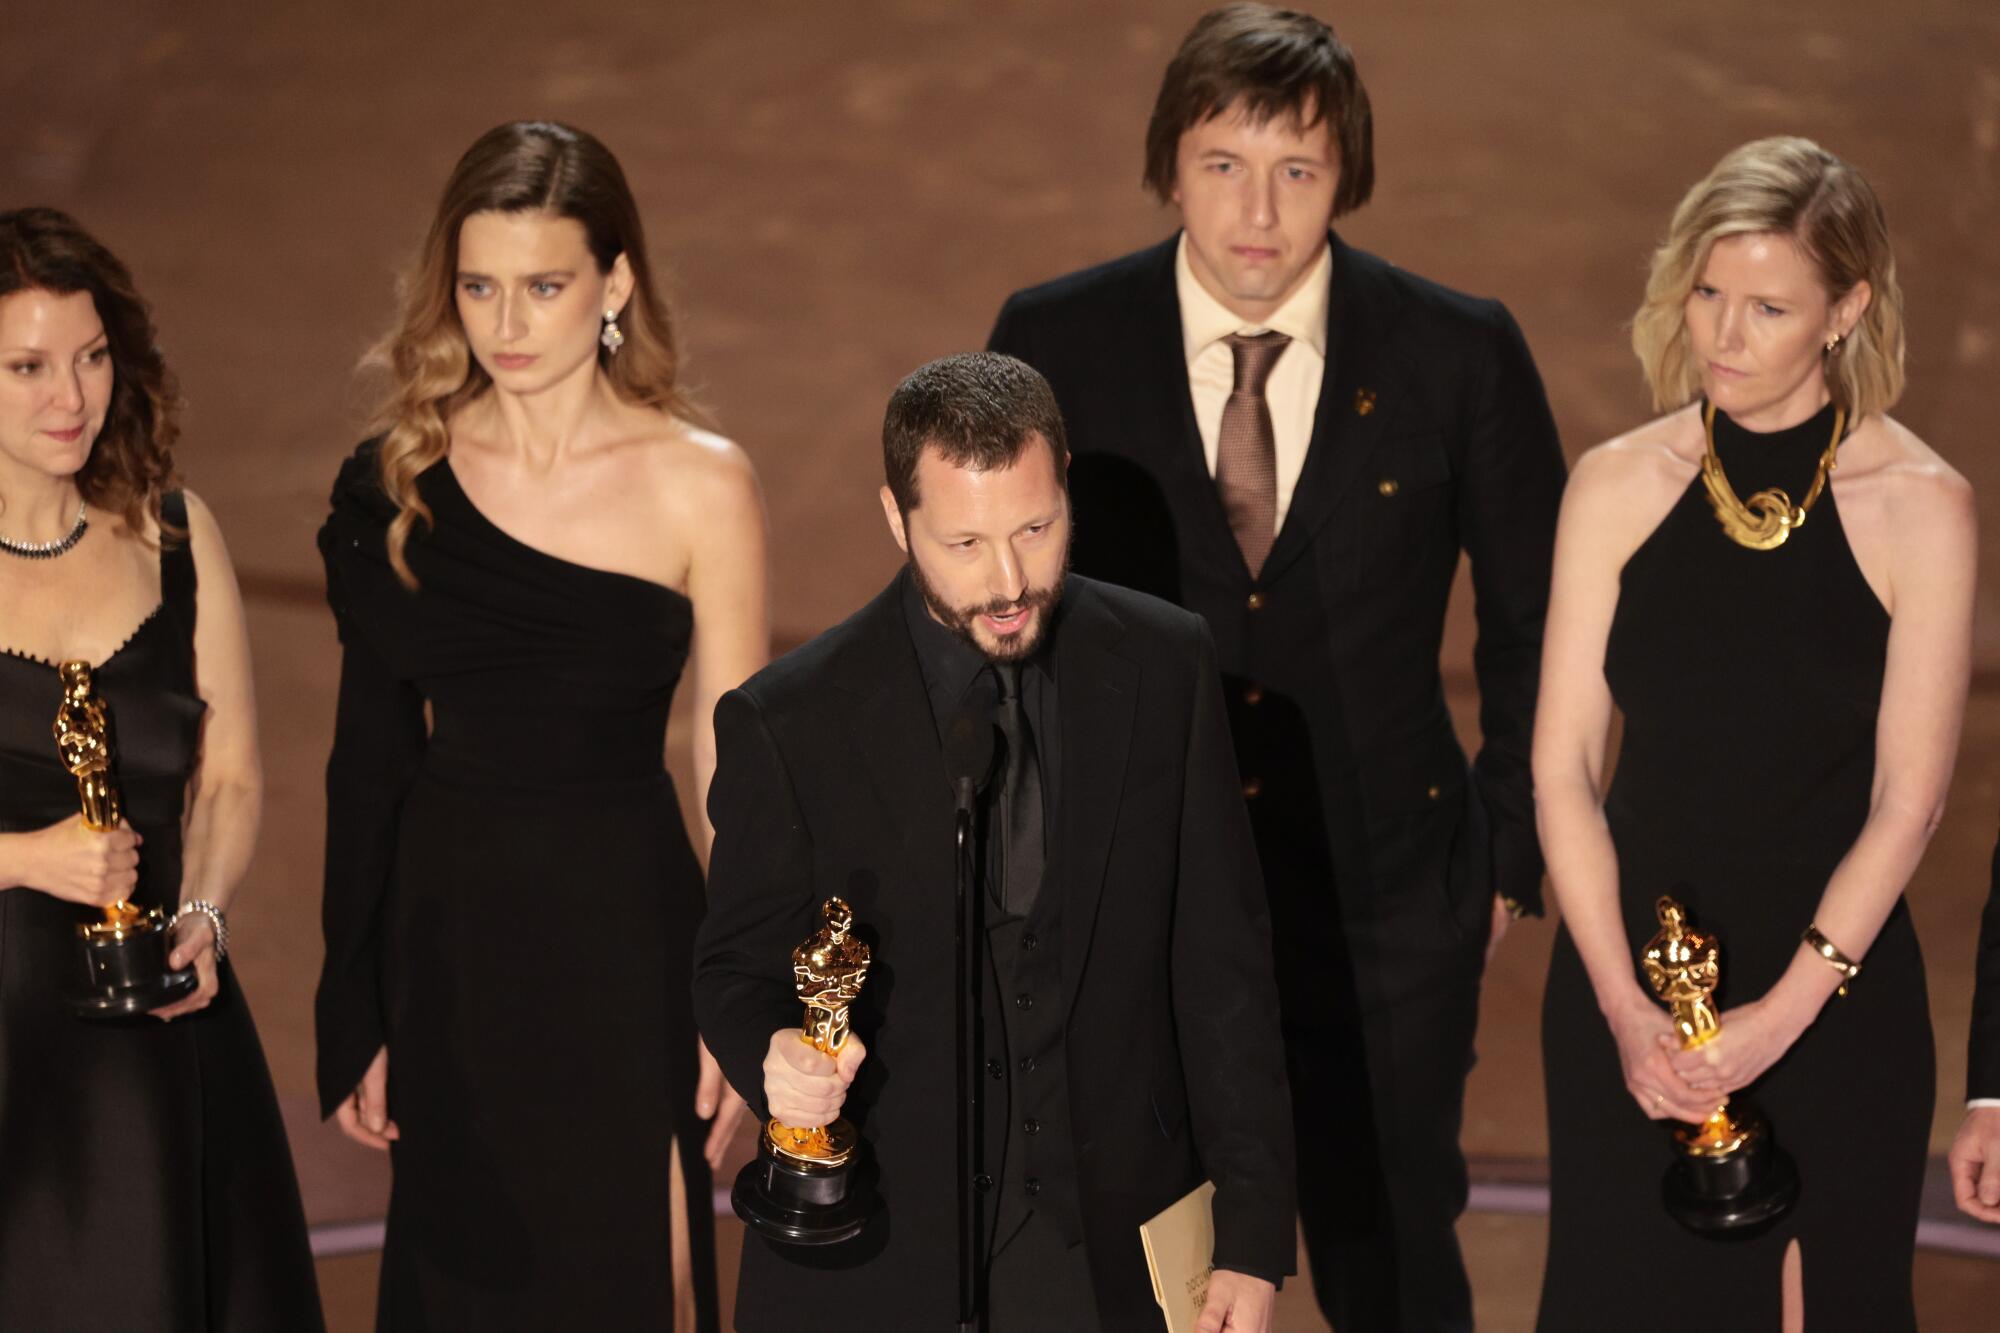 '20 Days in Mariupol' director Mstyslav Chernov, center, accepting the Oscar for documentary feature at 96th Academy Awards